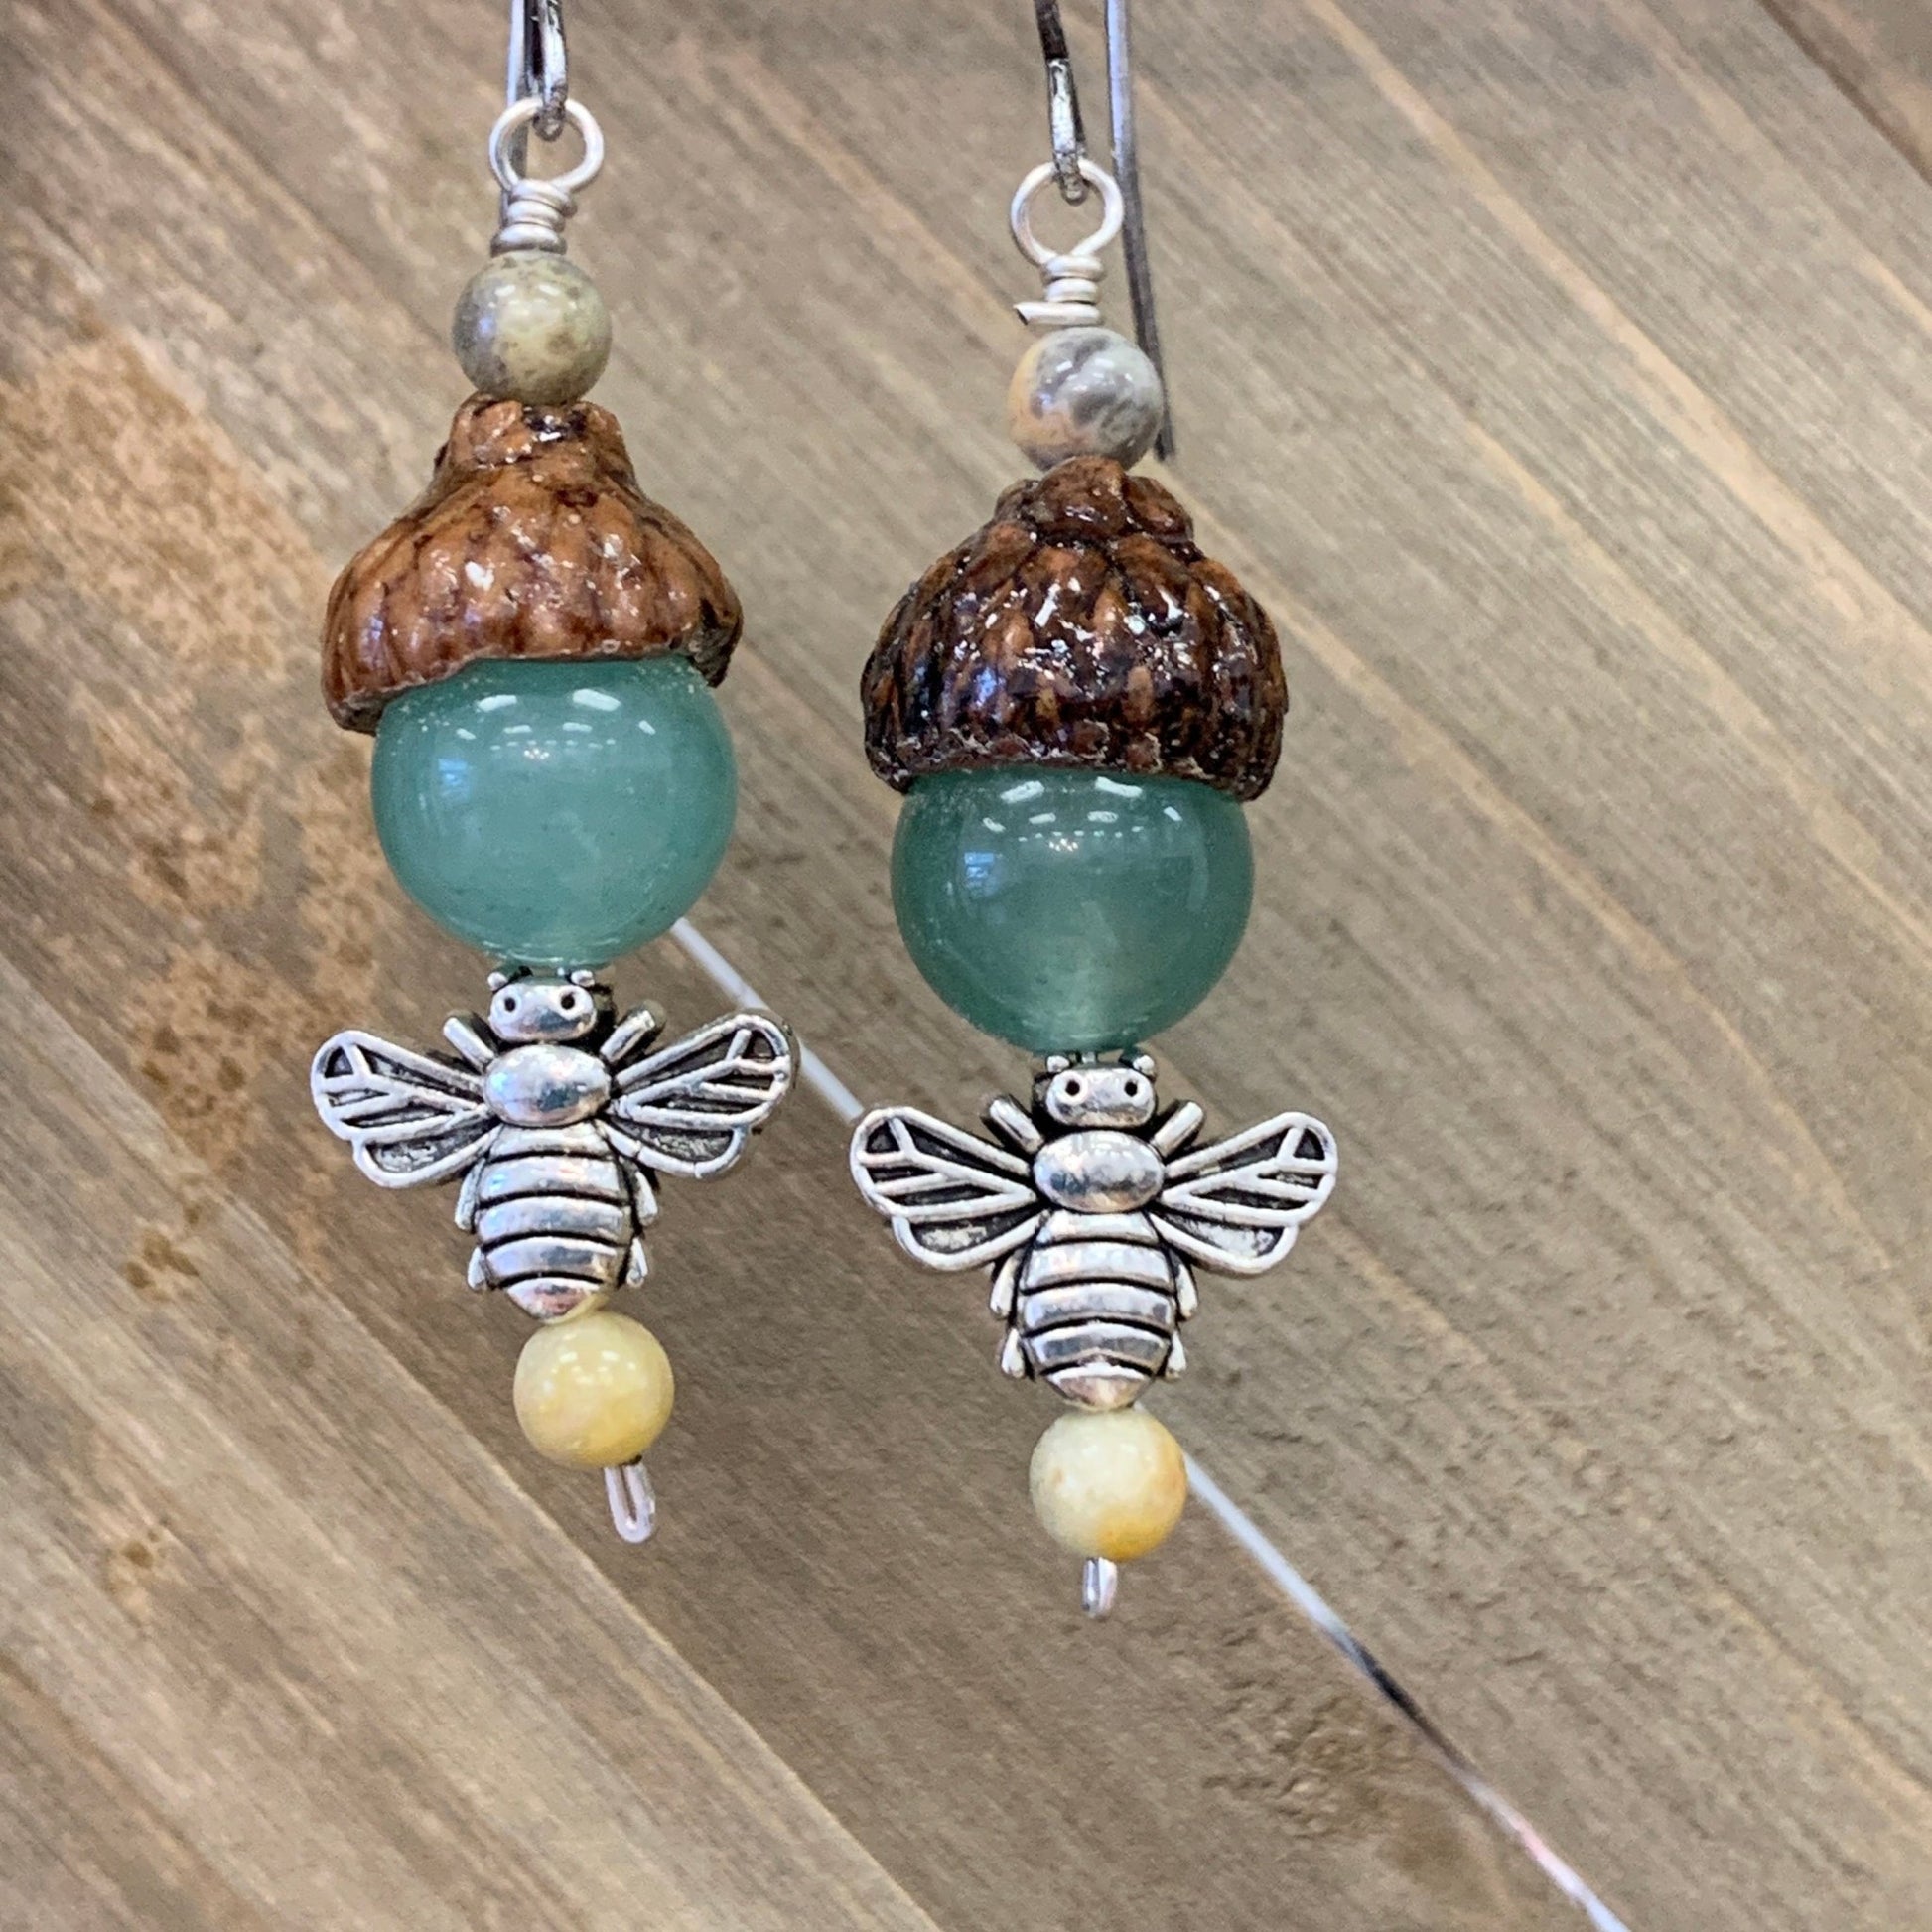 Silver Bumble Bee Earrings with Green Aventurine Acorns - Coral and Vine Co